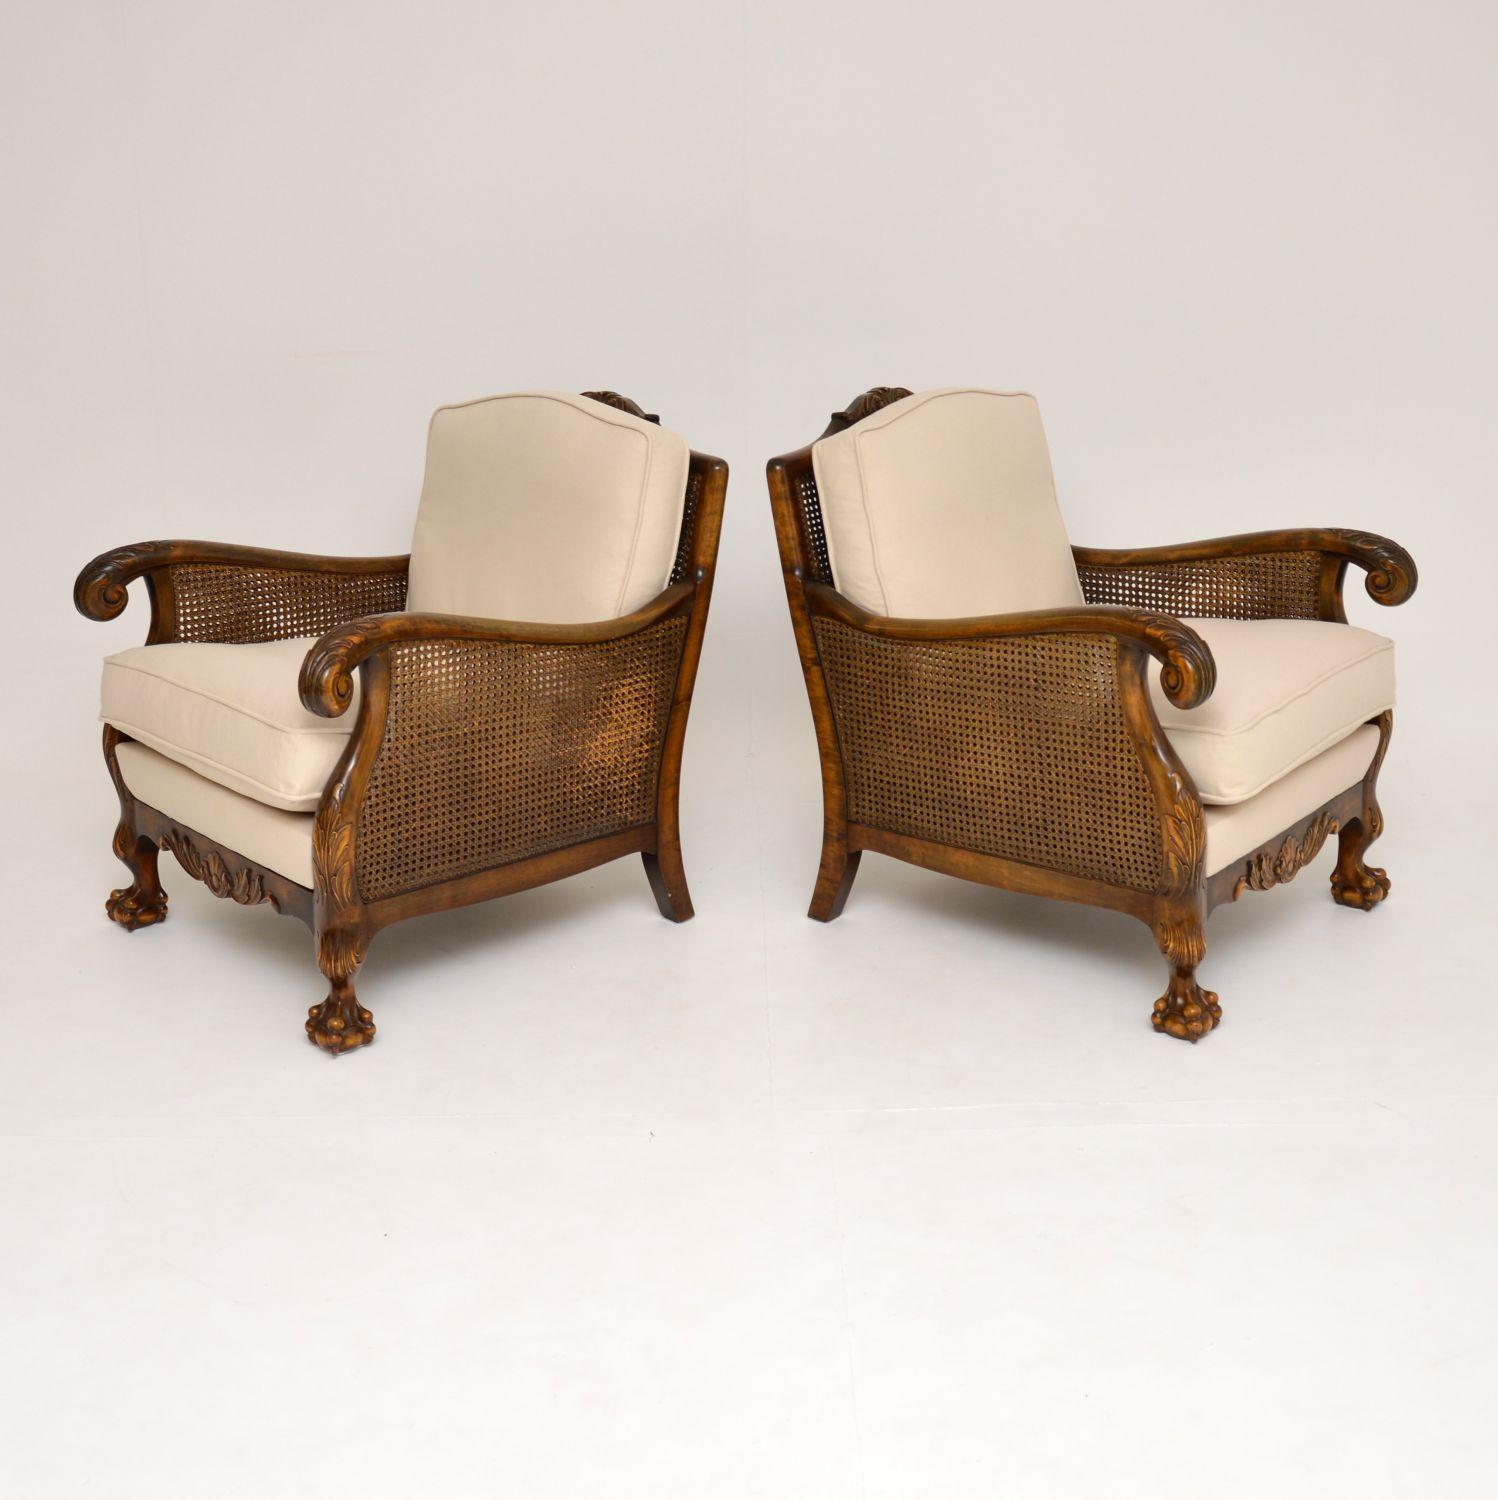 Pair of antique Chippendale style Swedish satin birch bergère armchairs in excellent condition and dating to circa 1920s-1930s period.

These armchairs have beautifully shaped frames and detailed carvings all over. They are double caned on the